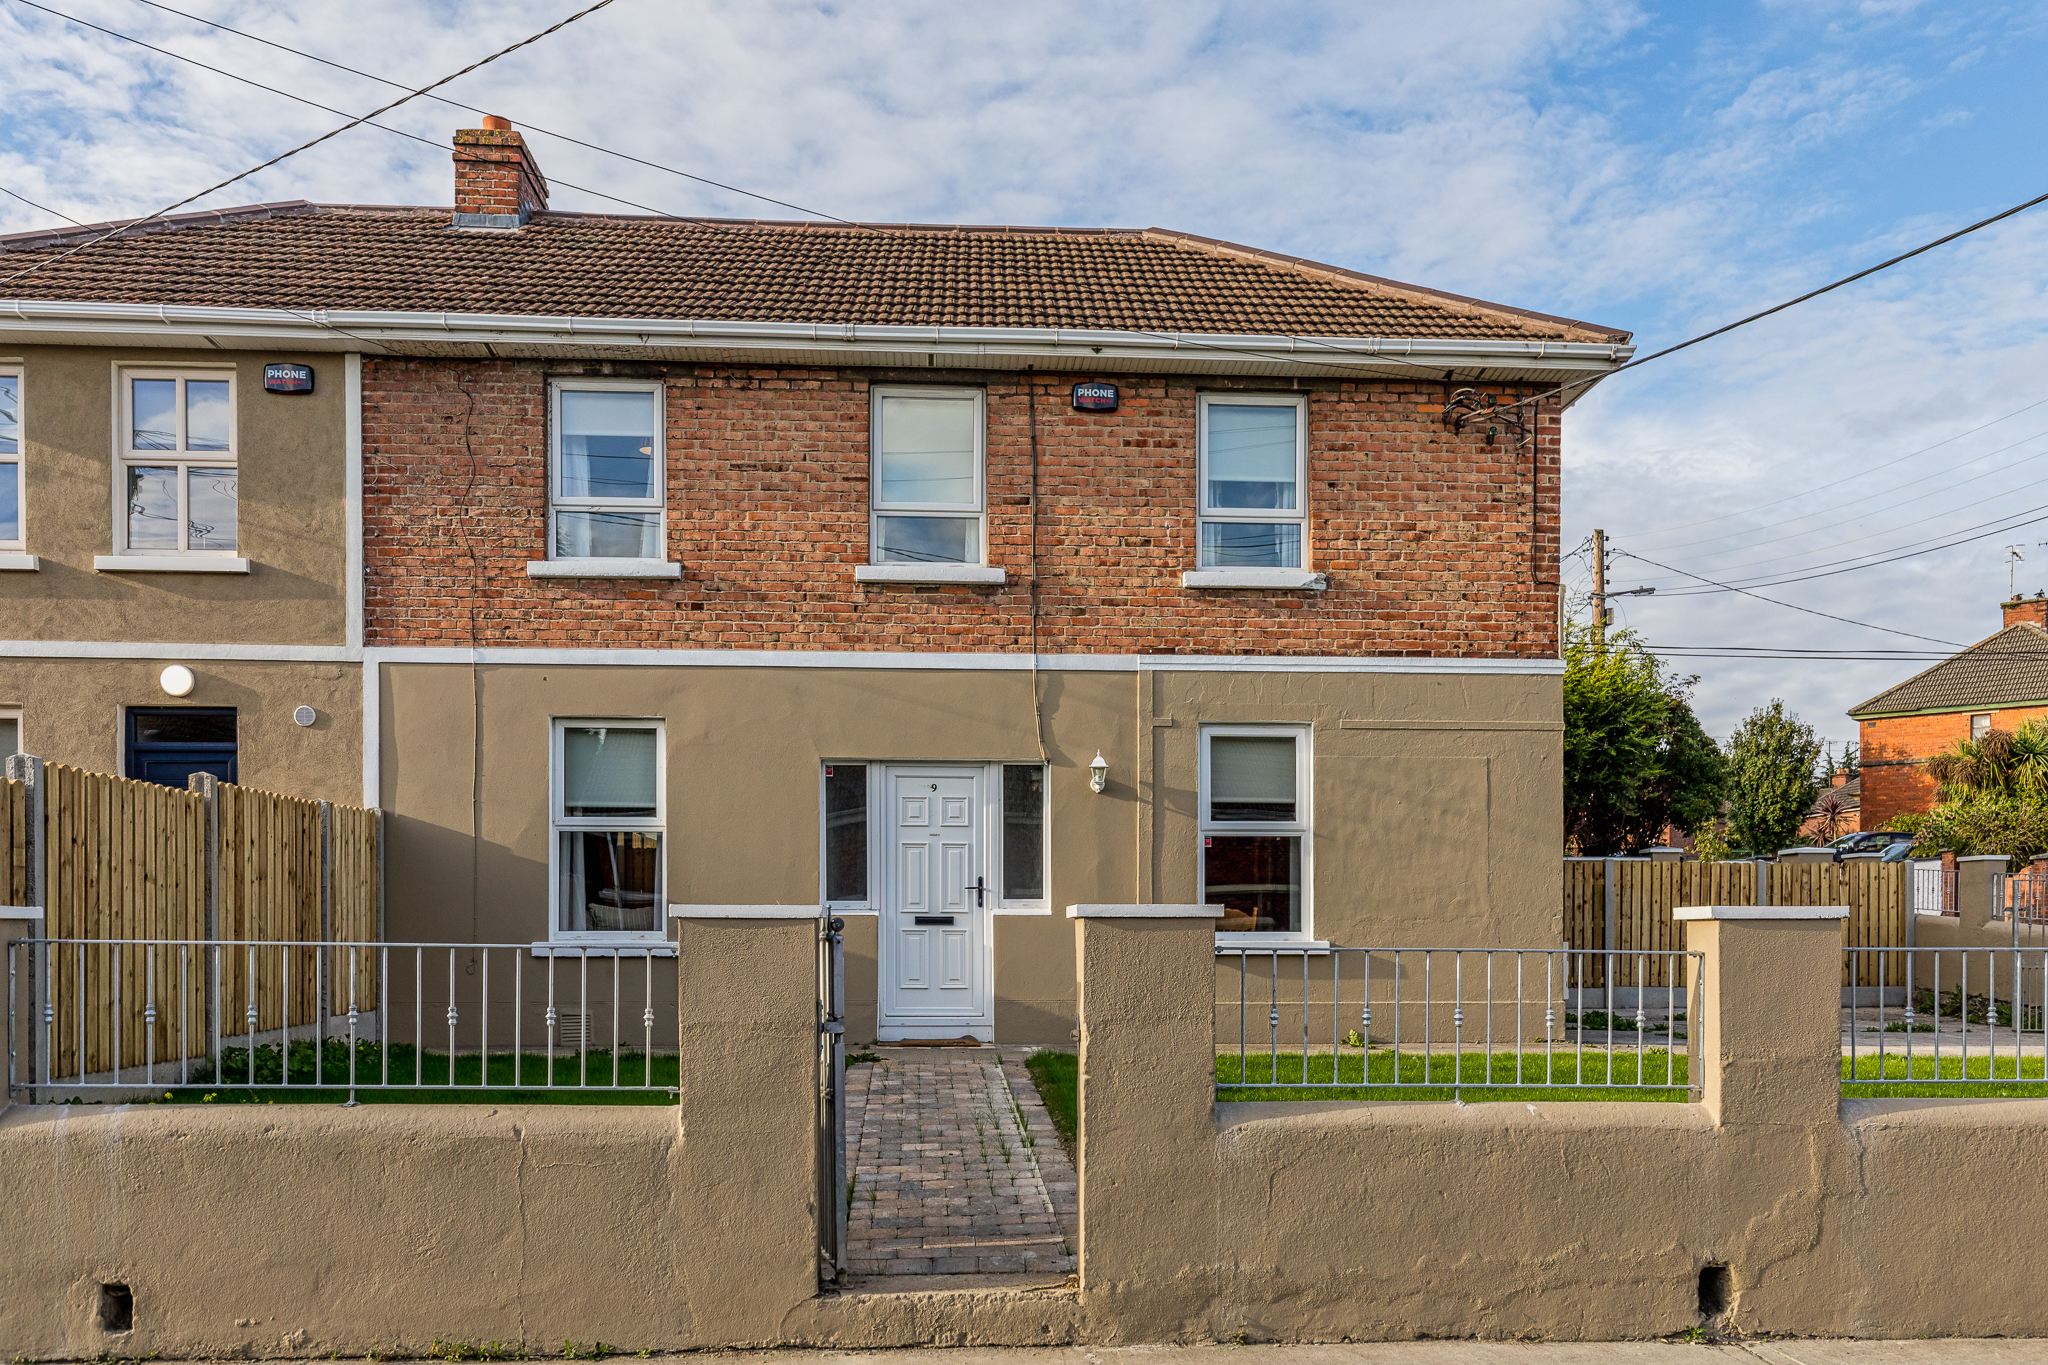 59 Pearse Park Drogheda Co Louth